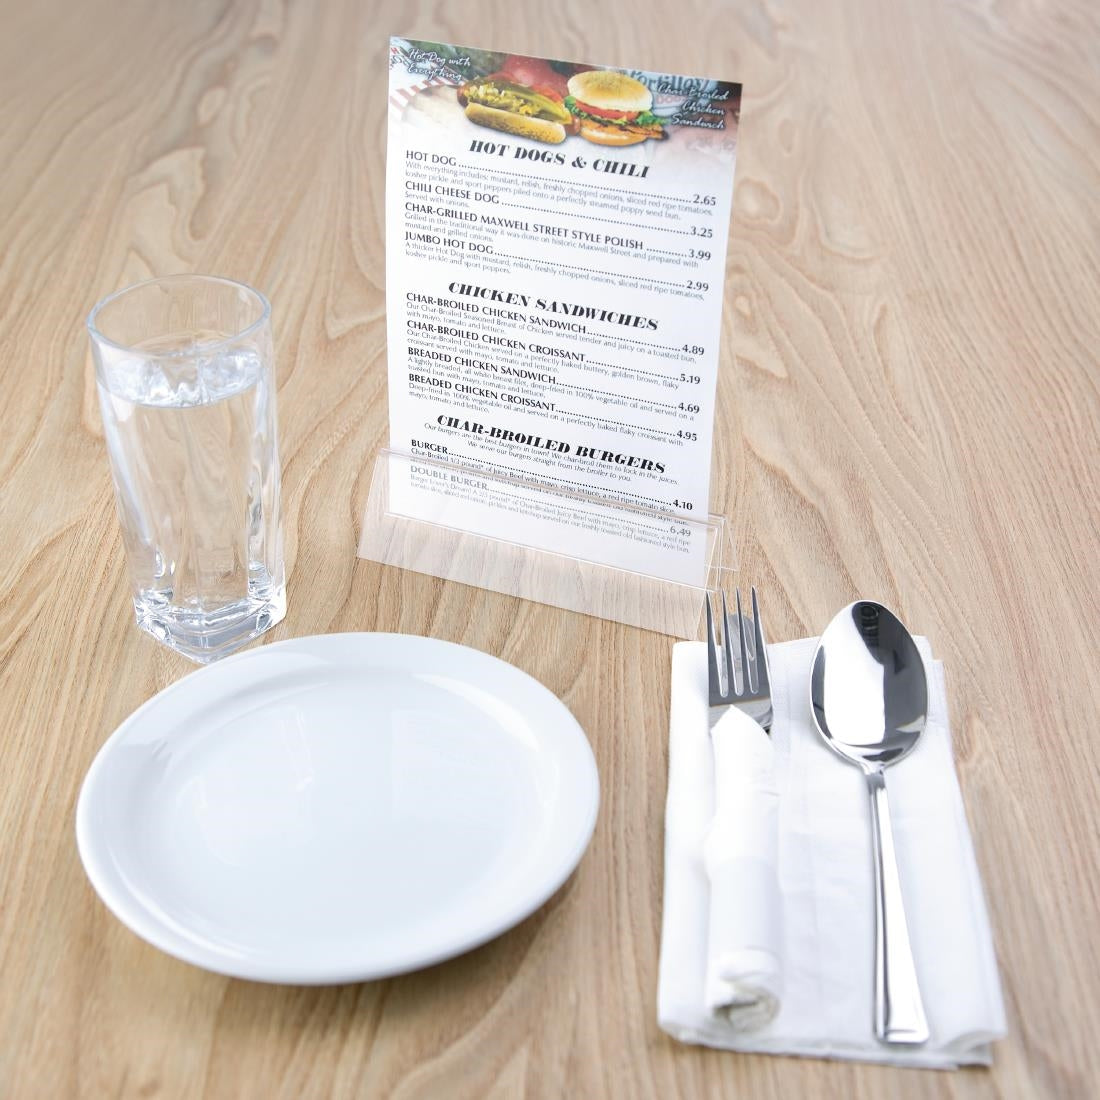 D790 Olympia Wide Base Acrylic Menu Holder JD Catering Equipment Solutions Ltd